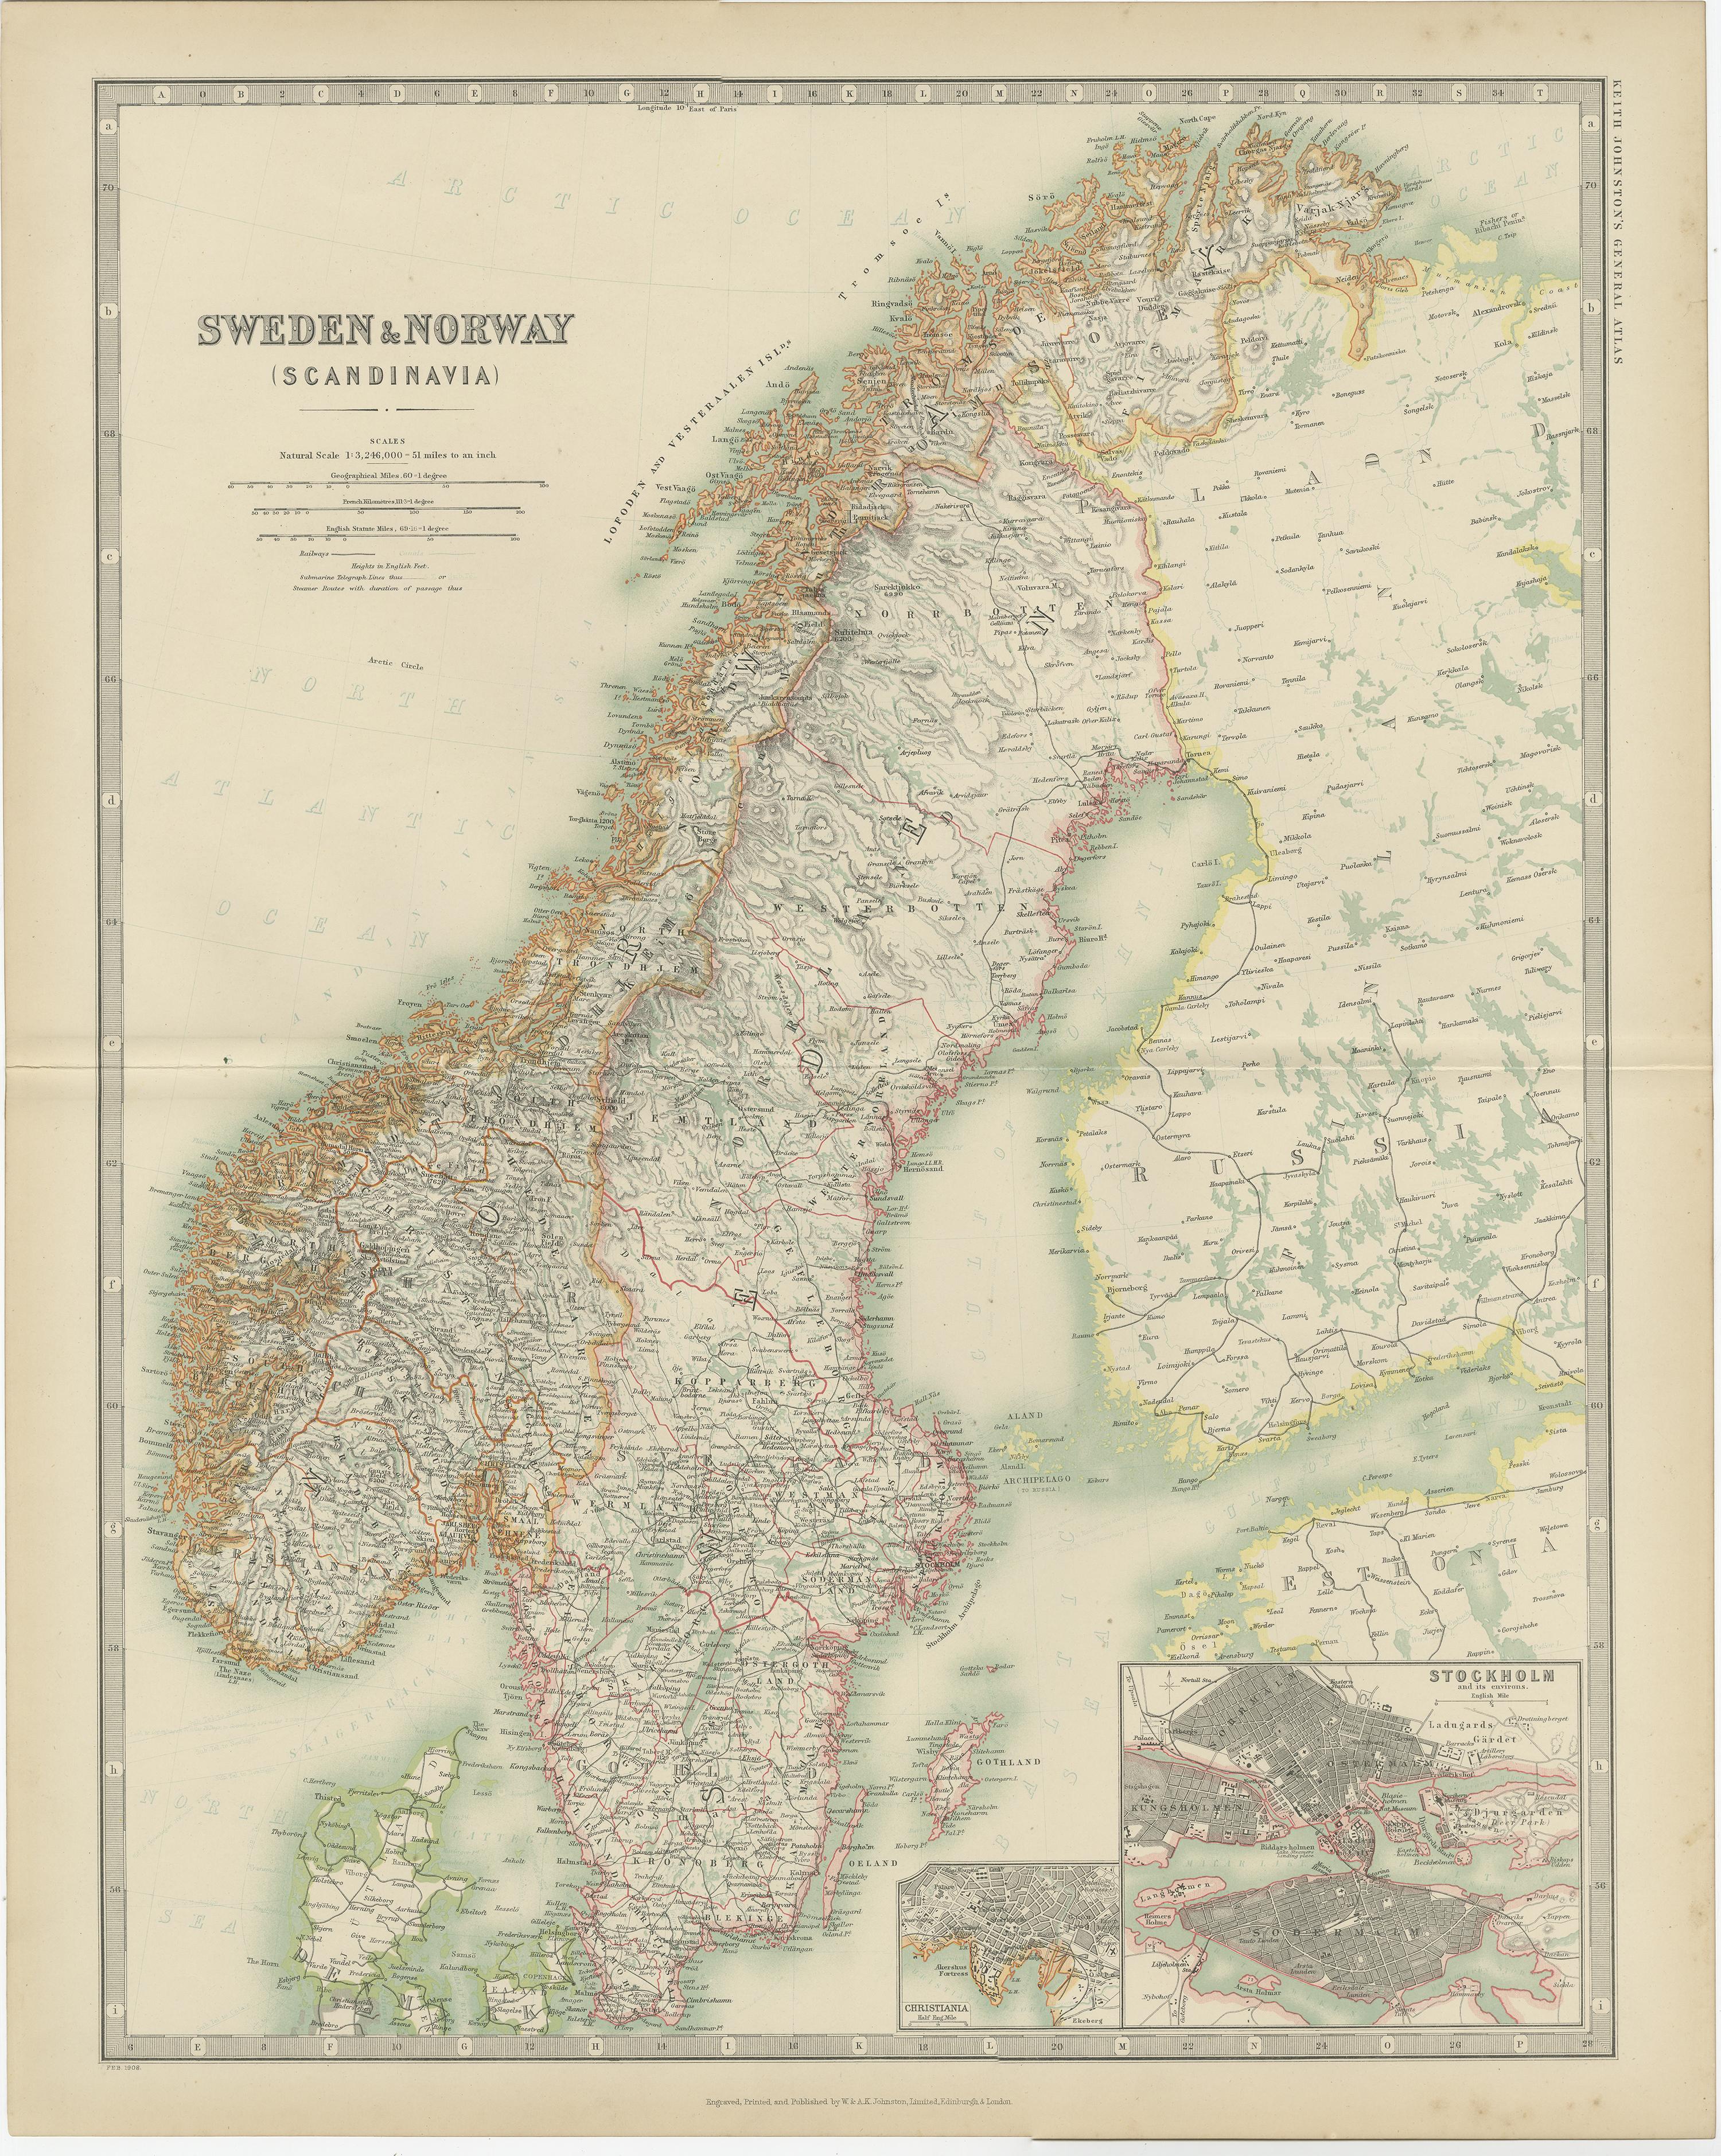 Antique map titled 'Sweden and Norway'. Original antique map of Sweden and Norway. With inset maps of Christiania and Stockholm. This map originates from the ‘Royal Atlas of Modern Geography’. Published by W. & A.K. Johnston, 1909.